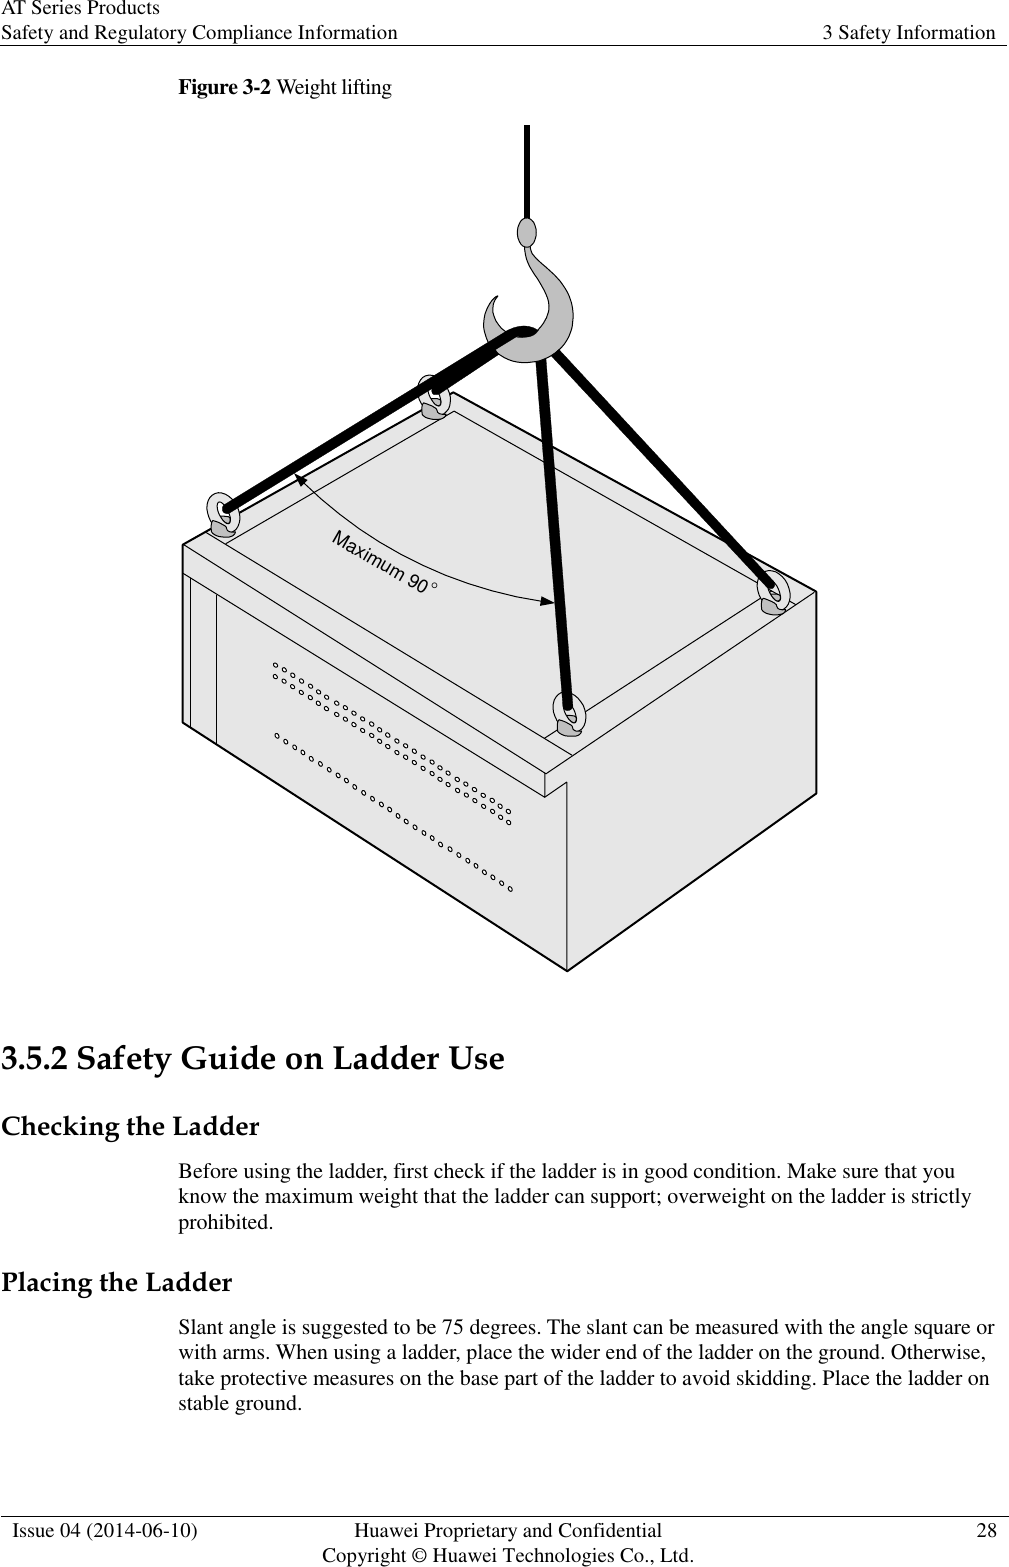 AT Series Products Safety and Regulatory Compliance Information 3 Safety Information  Issue 04 (2014-06-10) Huawei Proprietary and Confidential           Copyright © Huawei Technologies Co., Ltd. 28  Figure 3-2 Weight lifting Maximum 90  3.5.2 Safety Guide on Ladder Use Checking the Ladder Before using the ladder, first check if the ladder is in good condition. Make sure that you know the maximum weight that the ladder can support; overweight on the ladder is strictly prohibited. Placing the Ladder Slant angle is suggested to be 75 degrees. The slant can be measured with the angle square or with arms. When using a ladder, place the wider end of the ladder on the ground. Otherwise, take protective measures on the base part of the ladder to avoid skidding. Place the ladder on stable ground. 